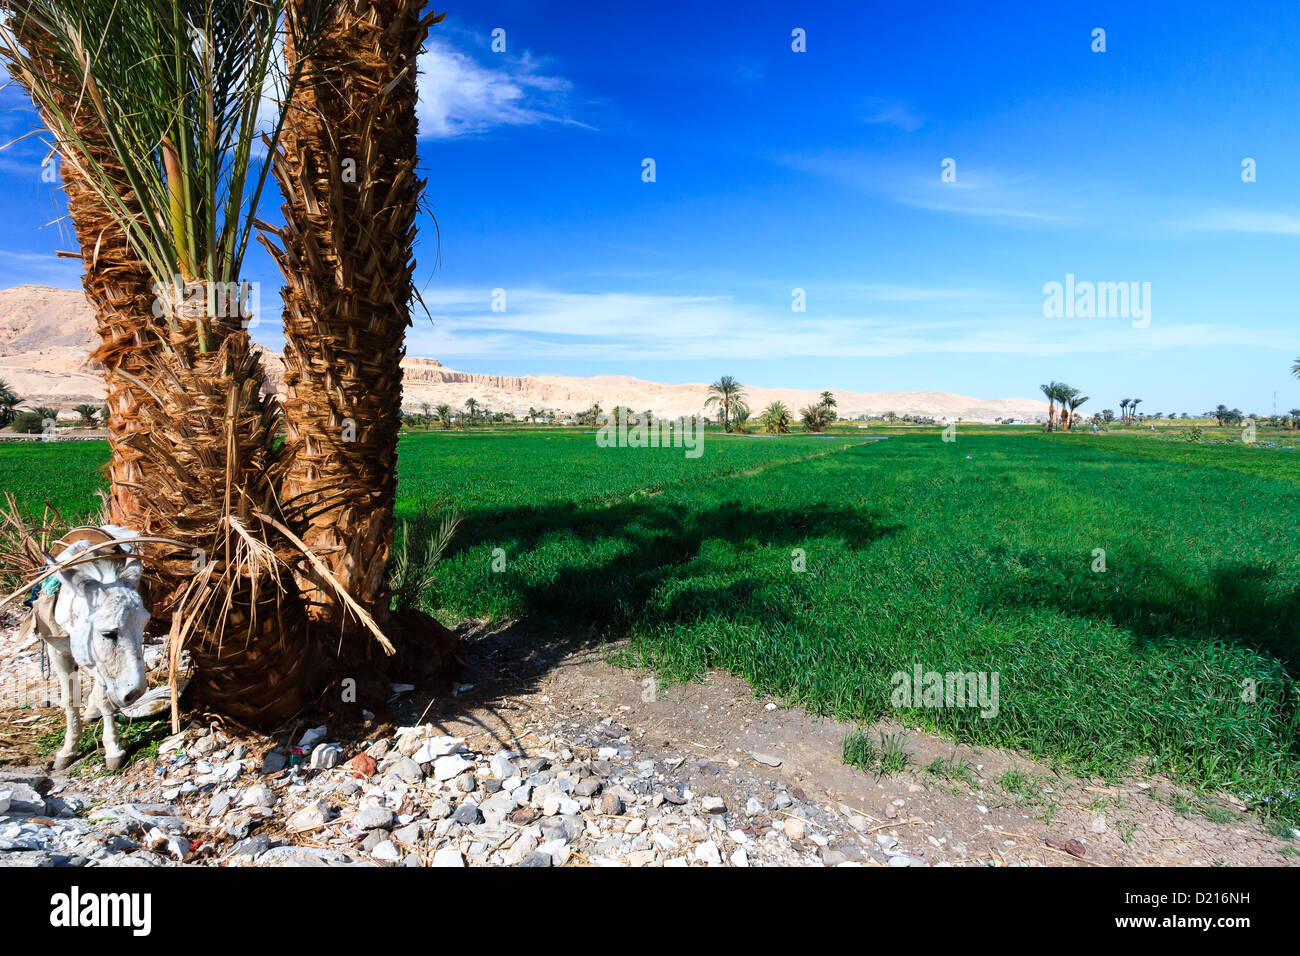 A donkey stands next to a green cultivated crop in Luxor, Egypt with desert mountains in the background Stock Photo